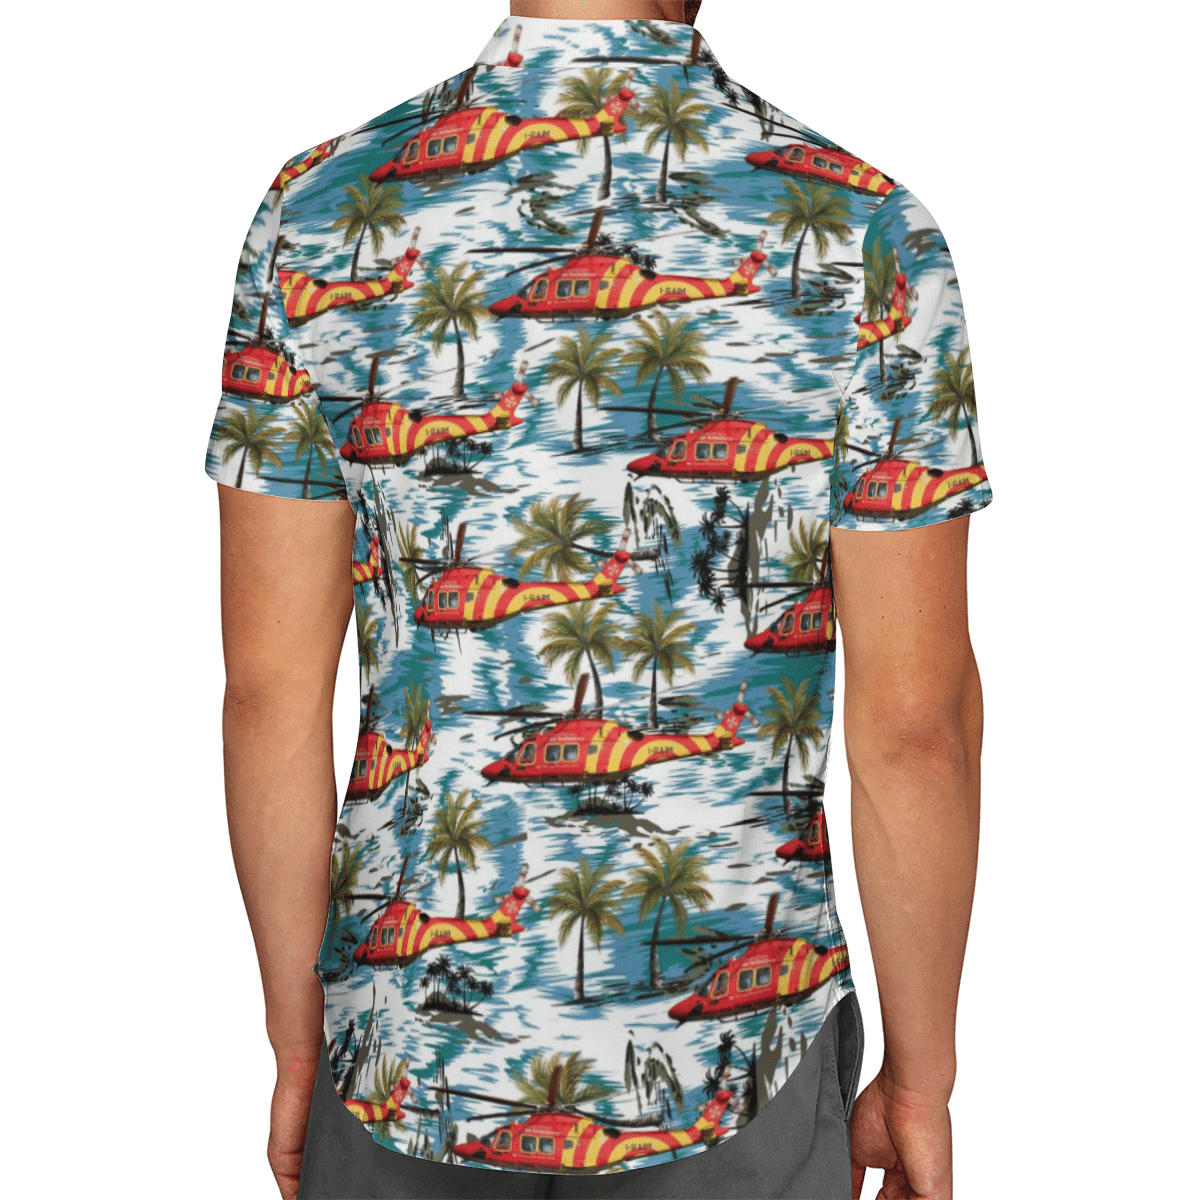 Going to the beach with a quality shirt 182